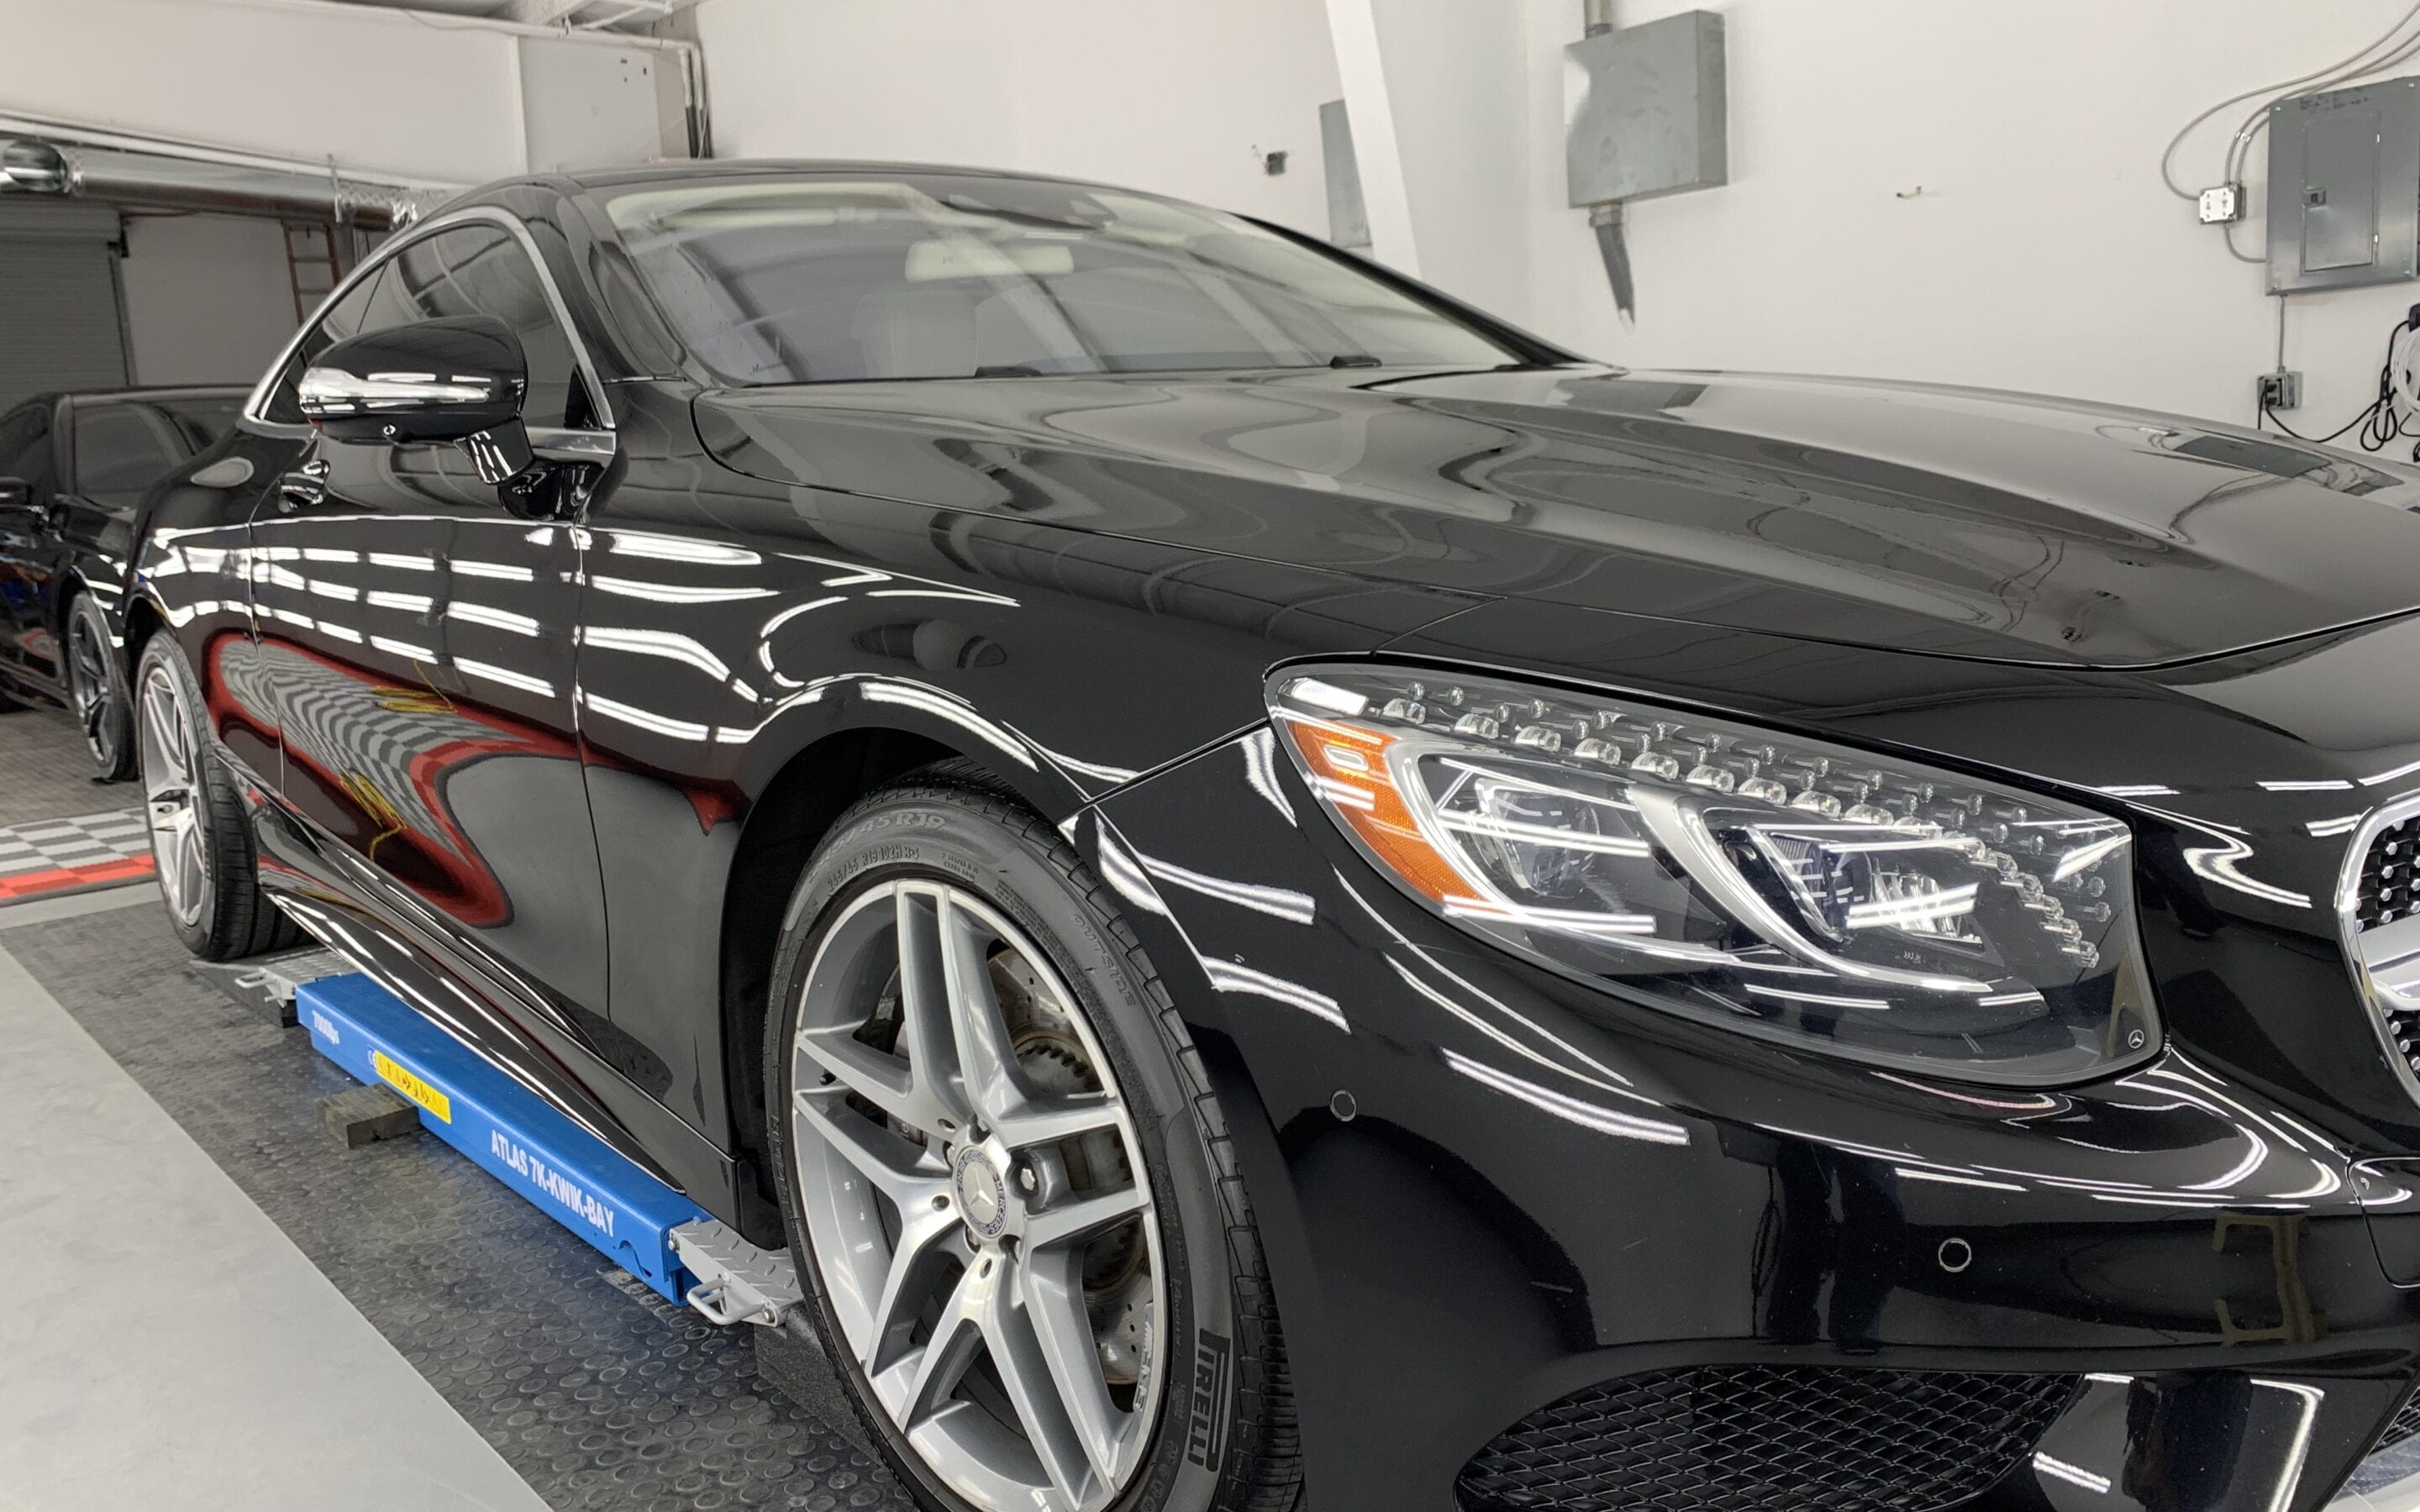 Photo of a Ceramic Coating of a 2014 Mercedes S-Class